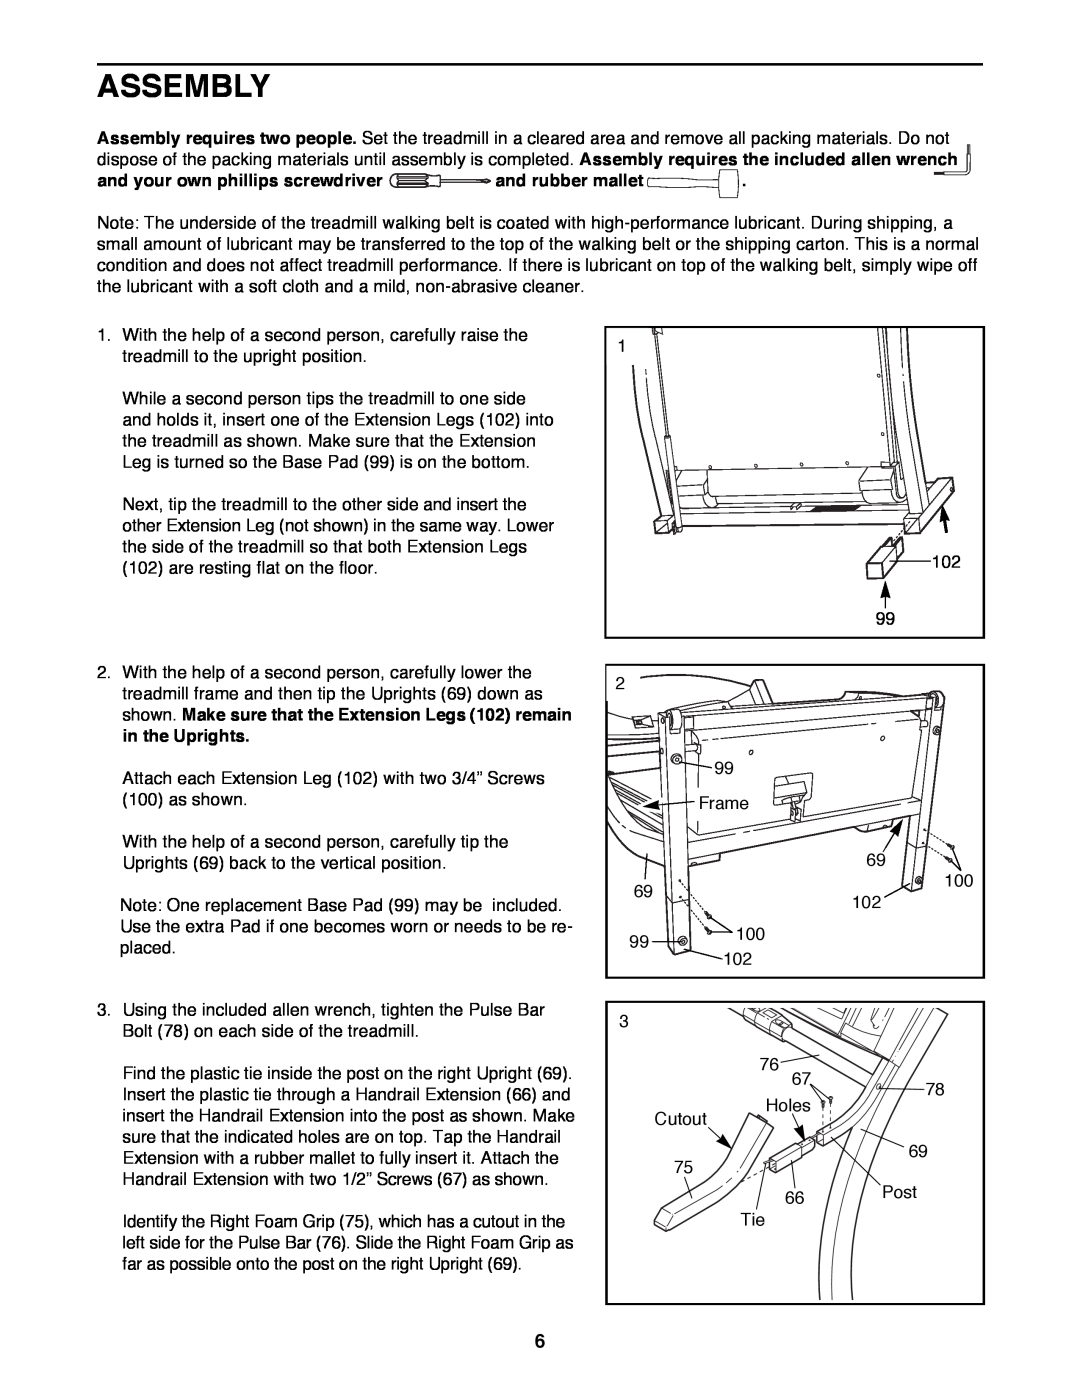 ProForm 785Pi user manual Assembly, and your own phillips screwdriver and rubber mallet, in the Uprights 